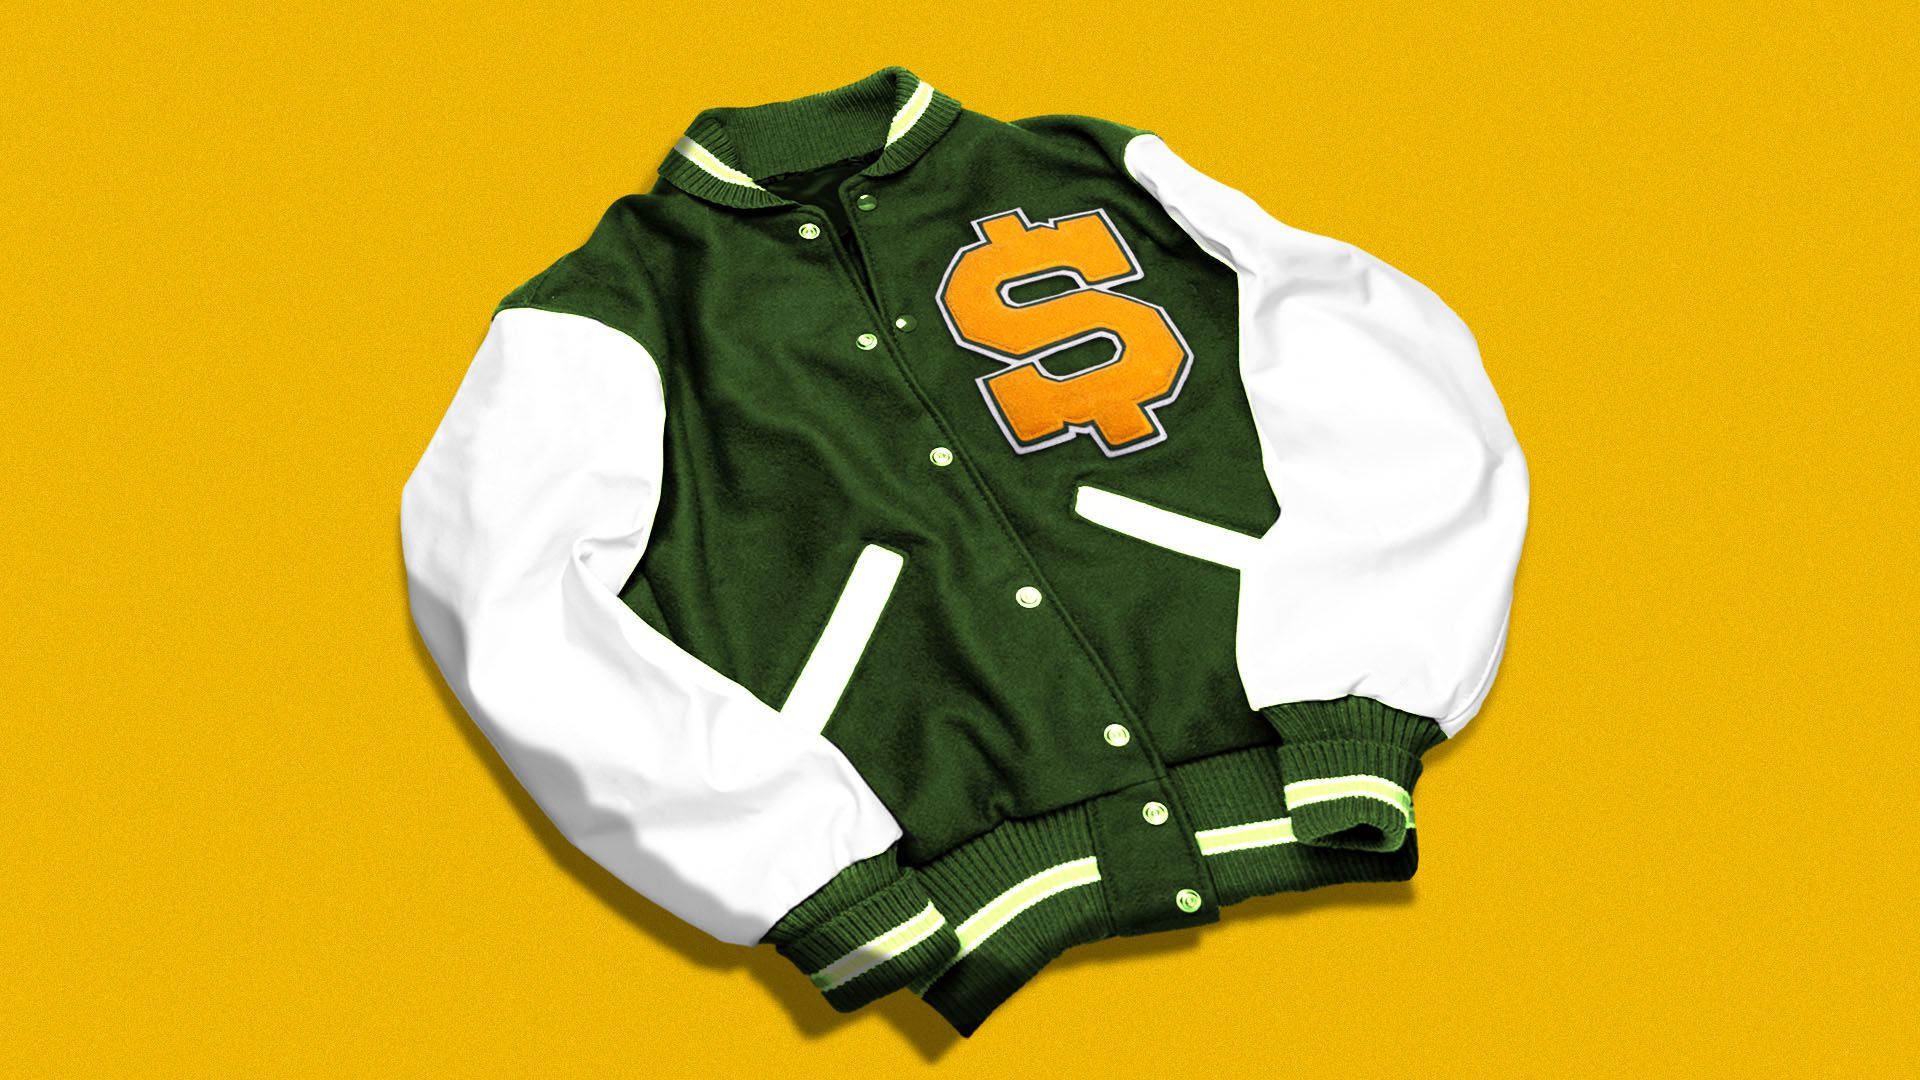 Illustration of a letterman jacket with a dollar sign on it